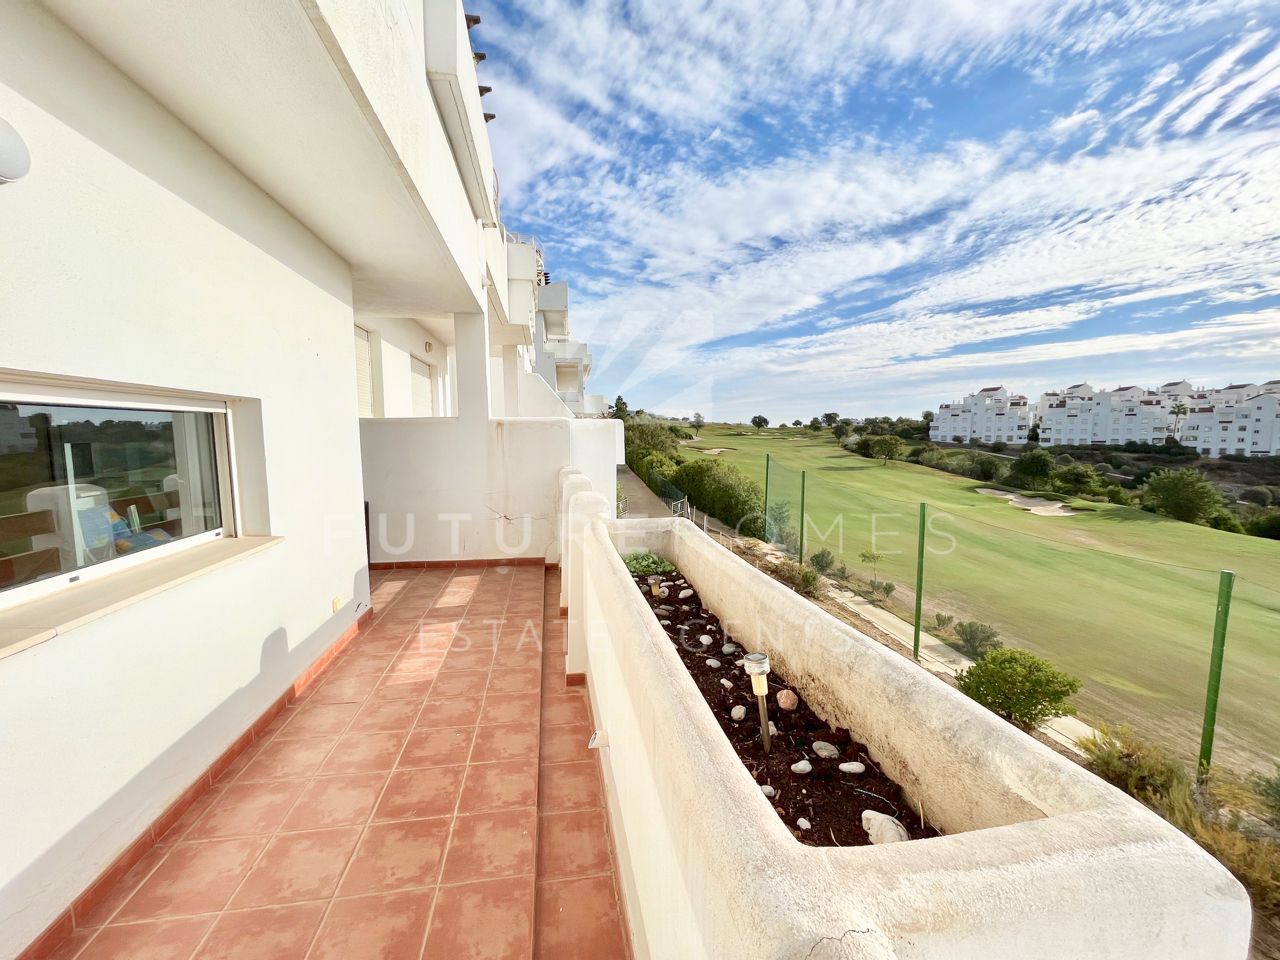 Frontline golf apartment with open views located in Valle Romano, Estepona